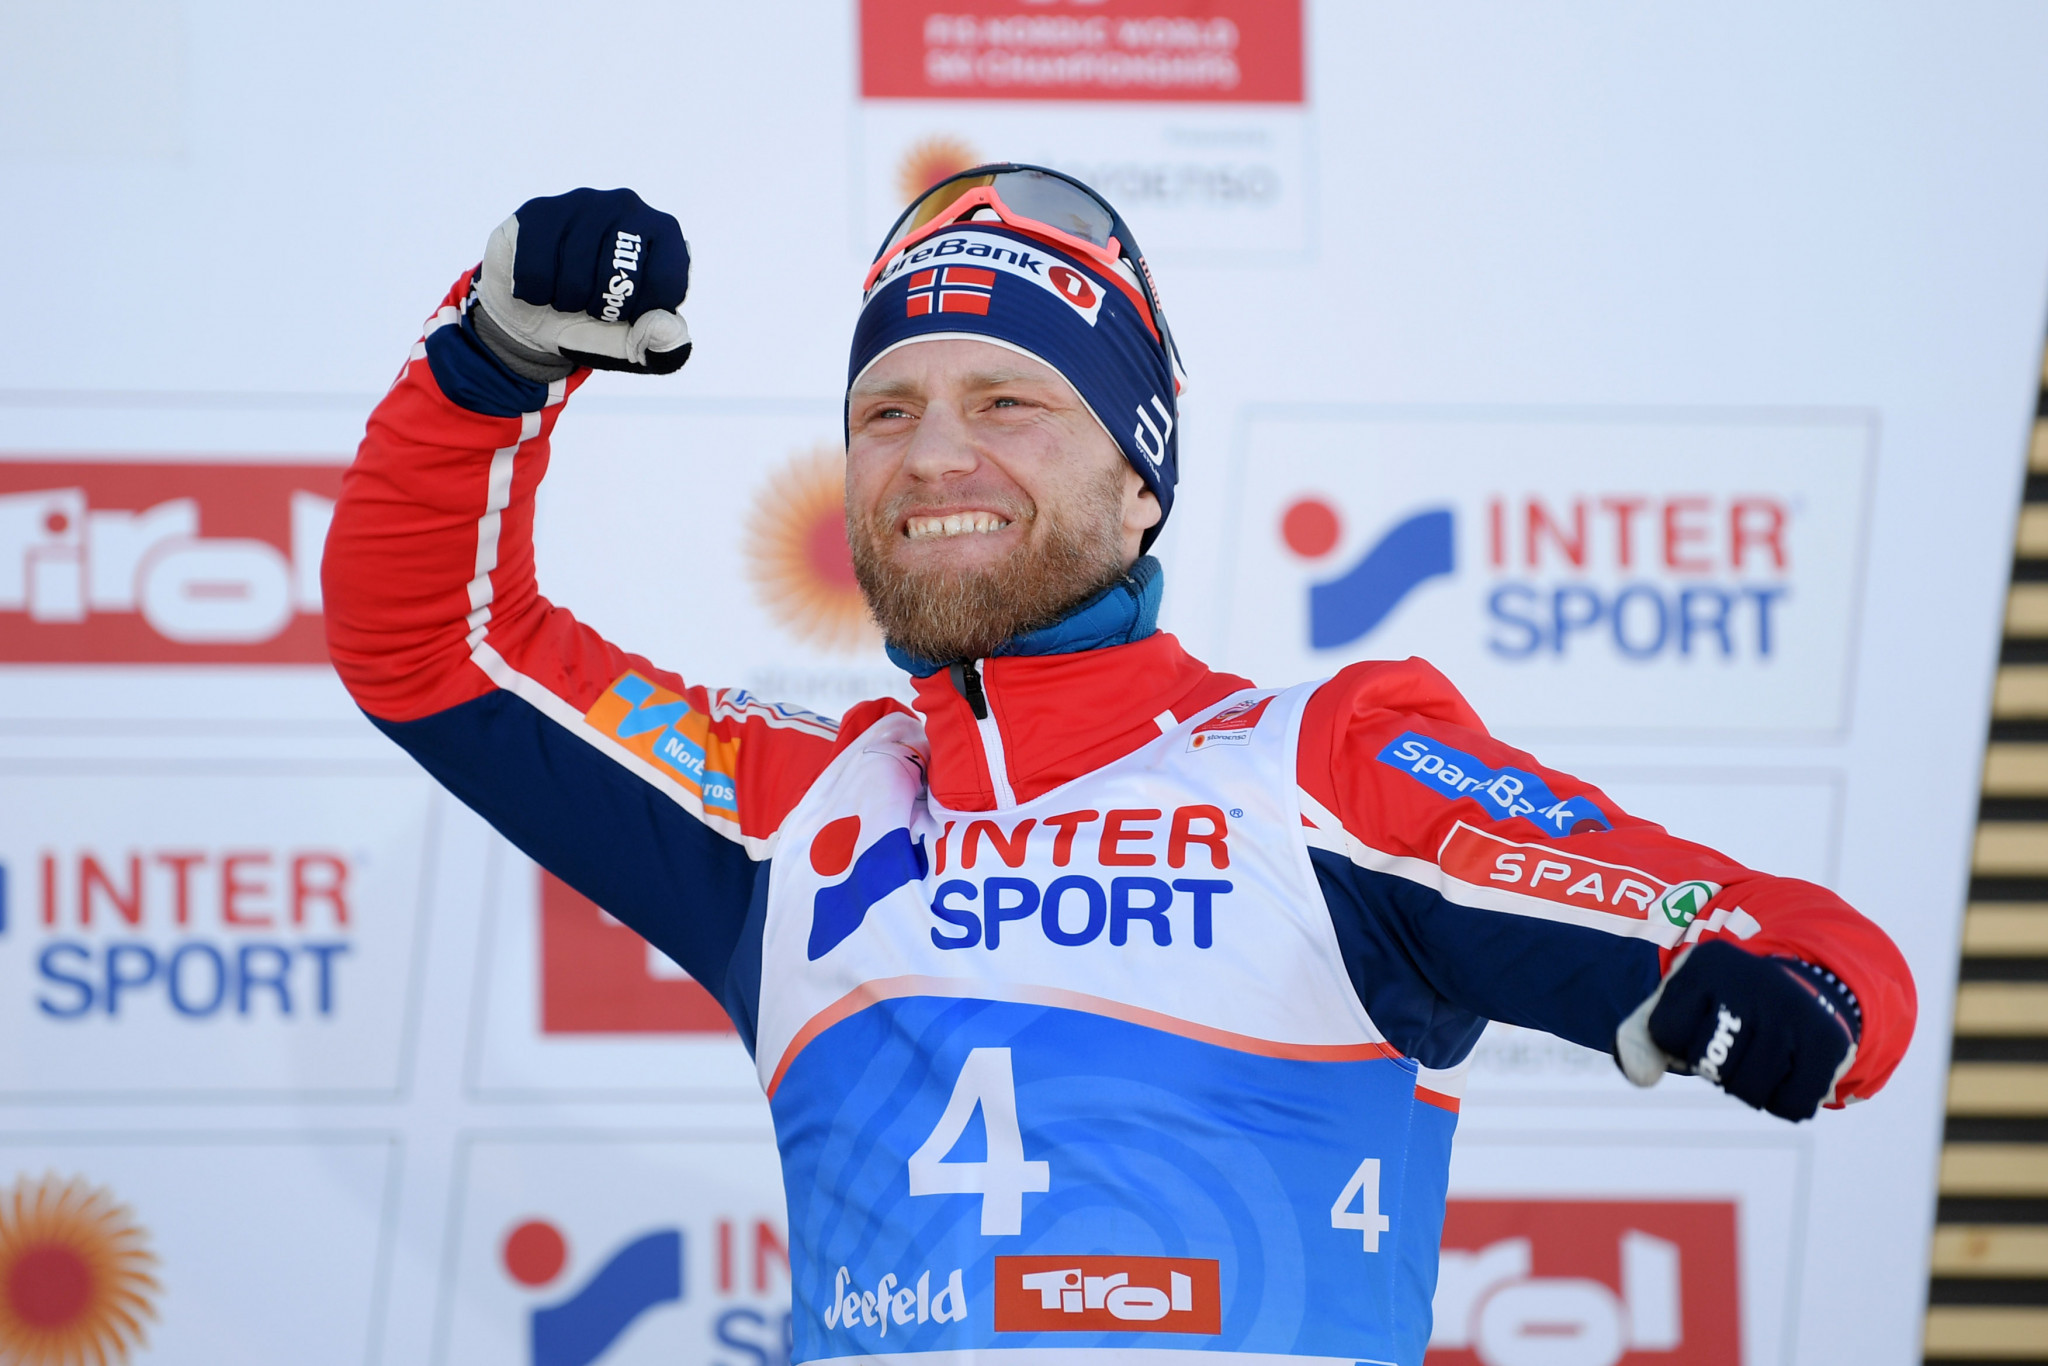 Martin Johnsrud Sundby won the men's 15km cross country race hours after an Austrian police raid arrested nine people ©Getty Images